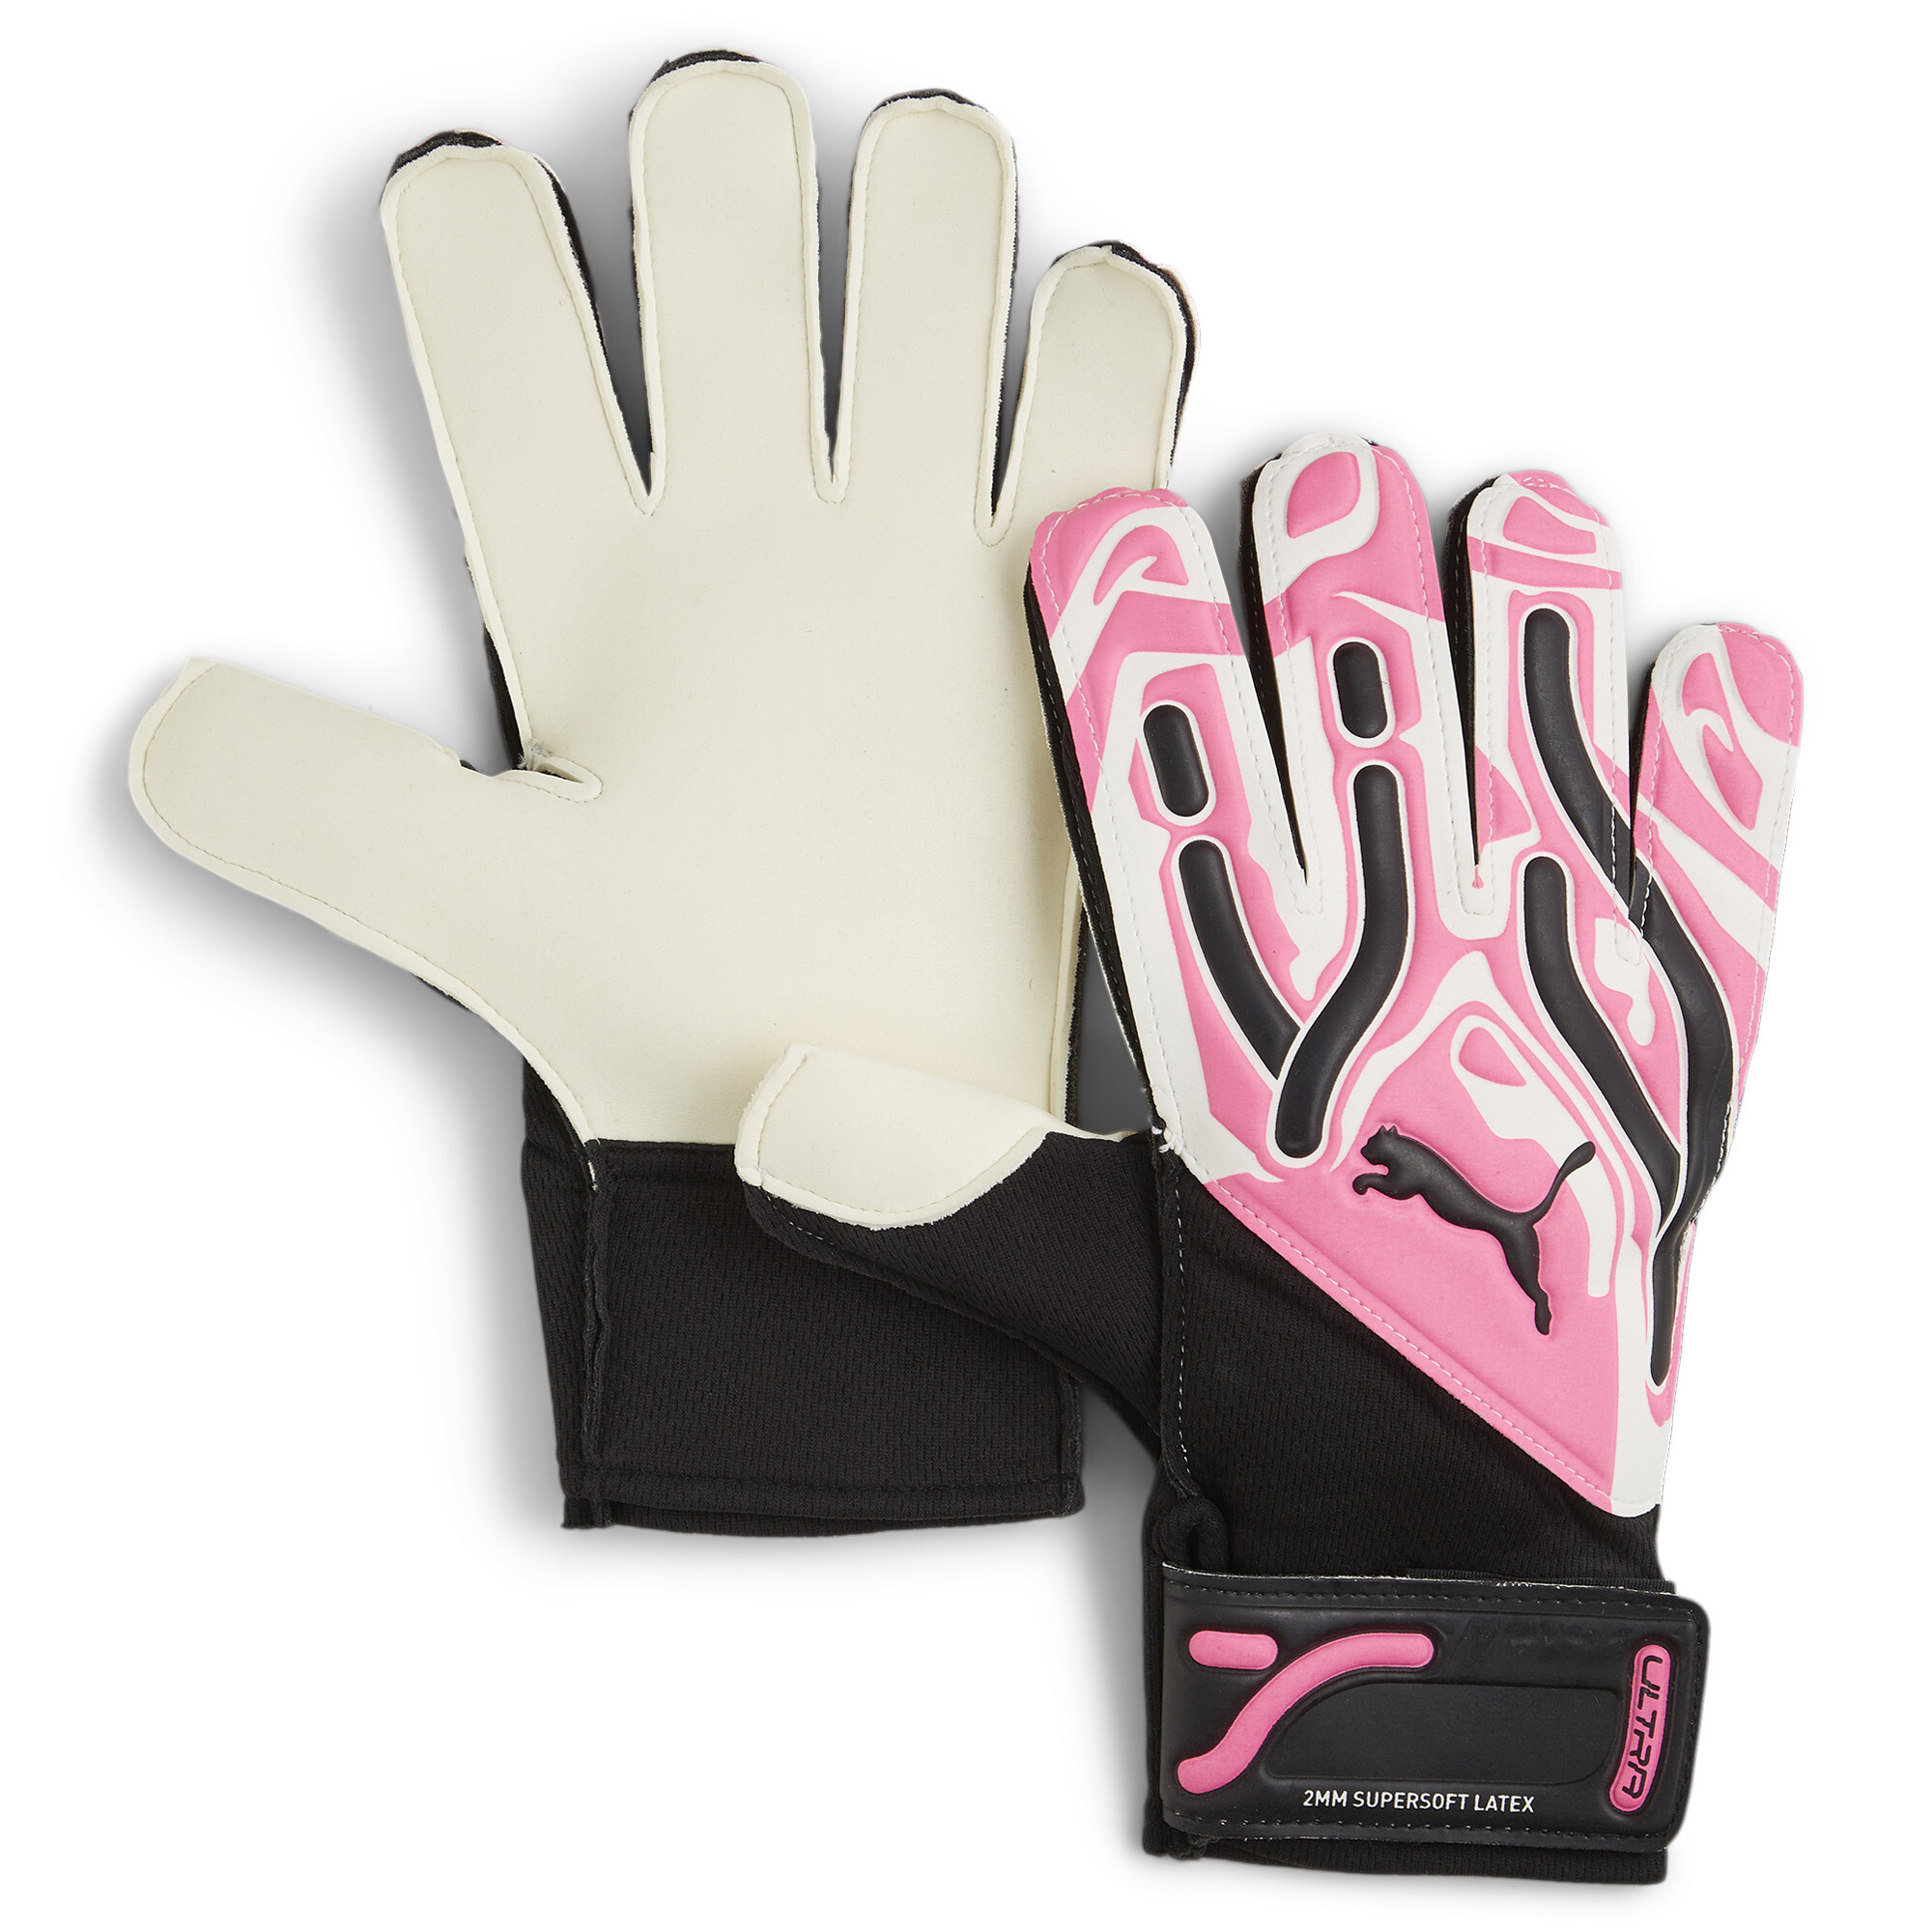 Men's PUMA ULTRA Play RC Goalkeeper Gloves In Pink, Size UK 9